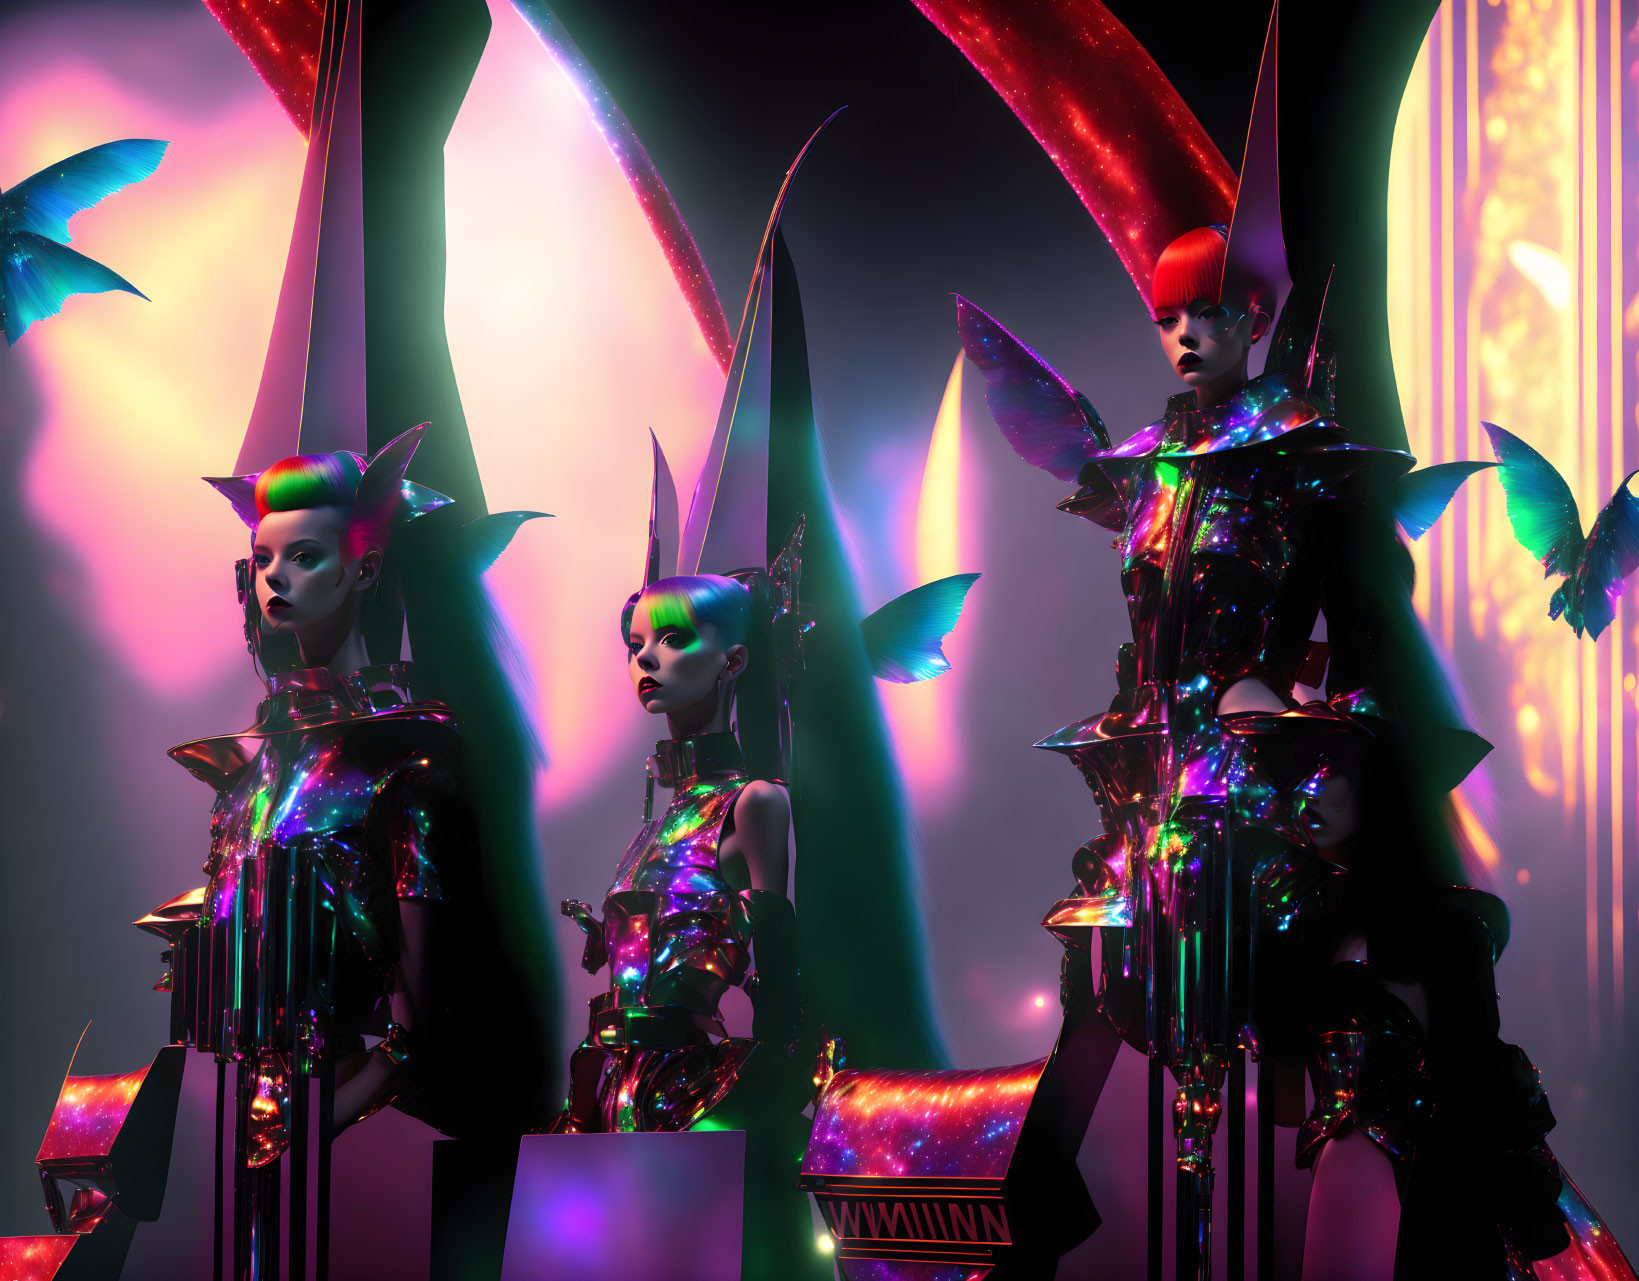 Four models in iridescent outfits and avant-garde hairstyles pose against neon lights and abstract shapes